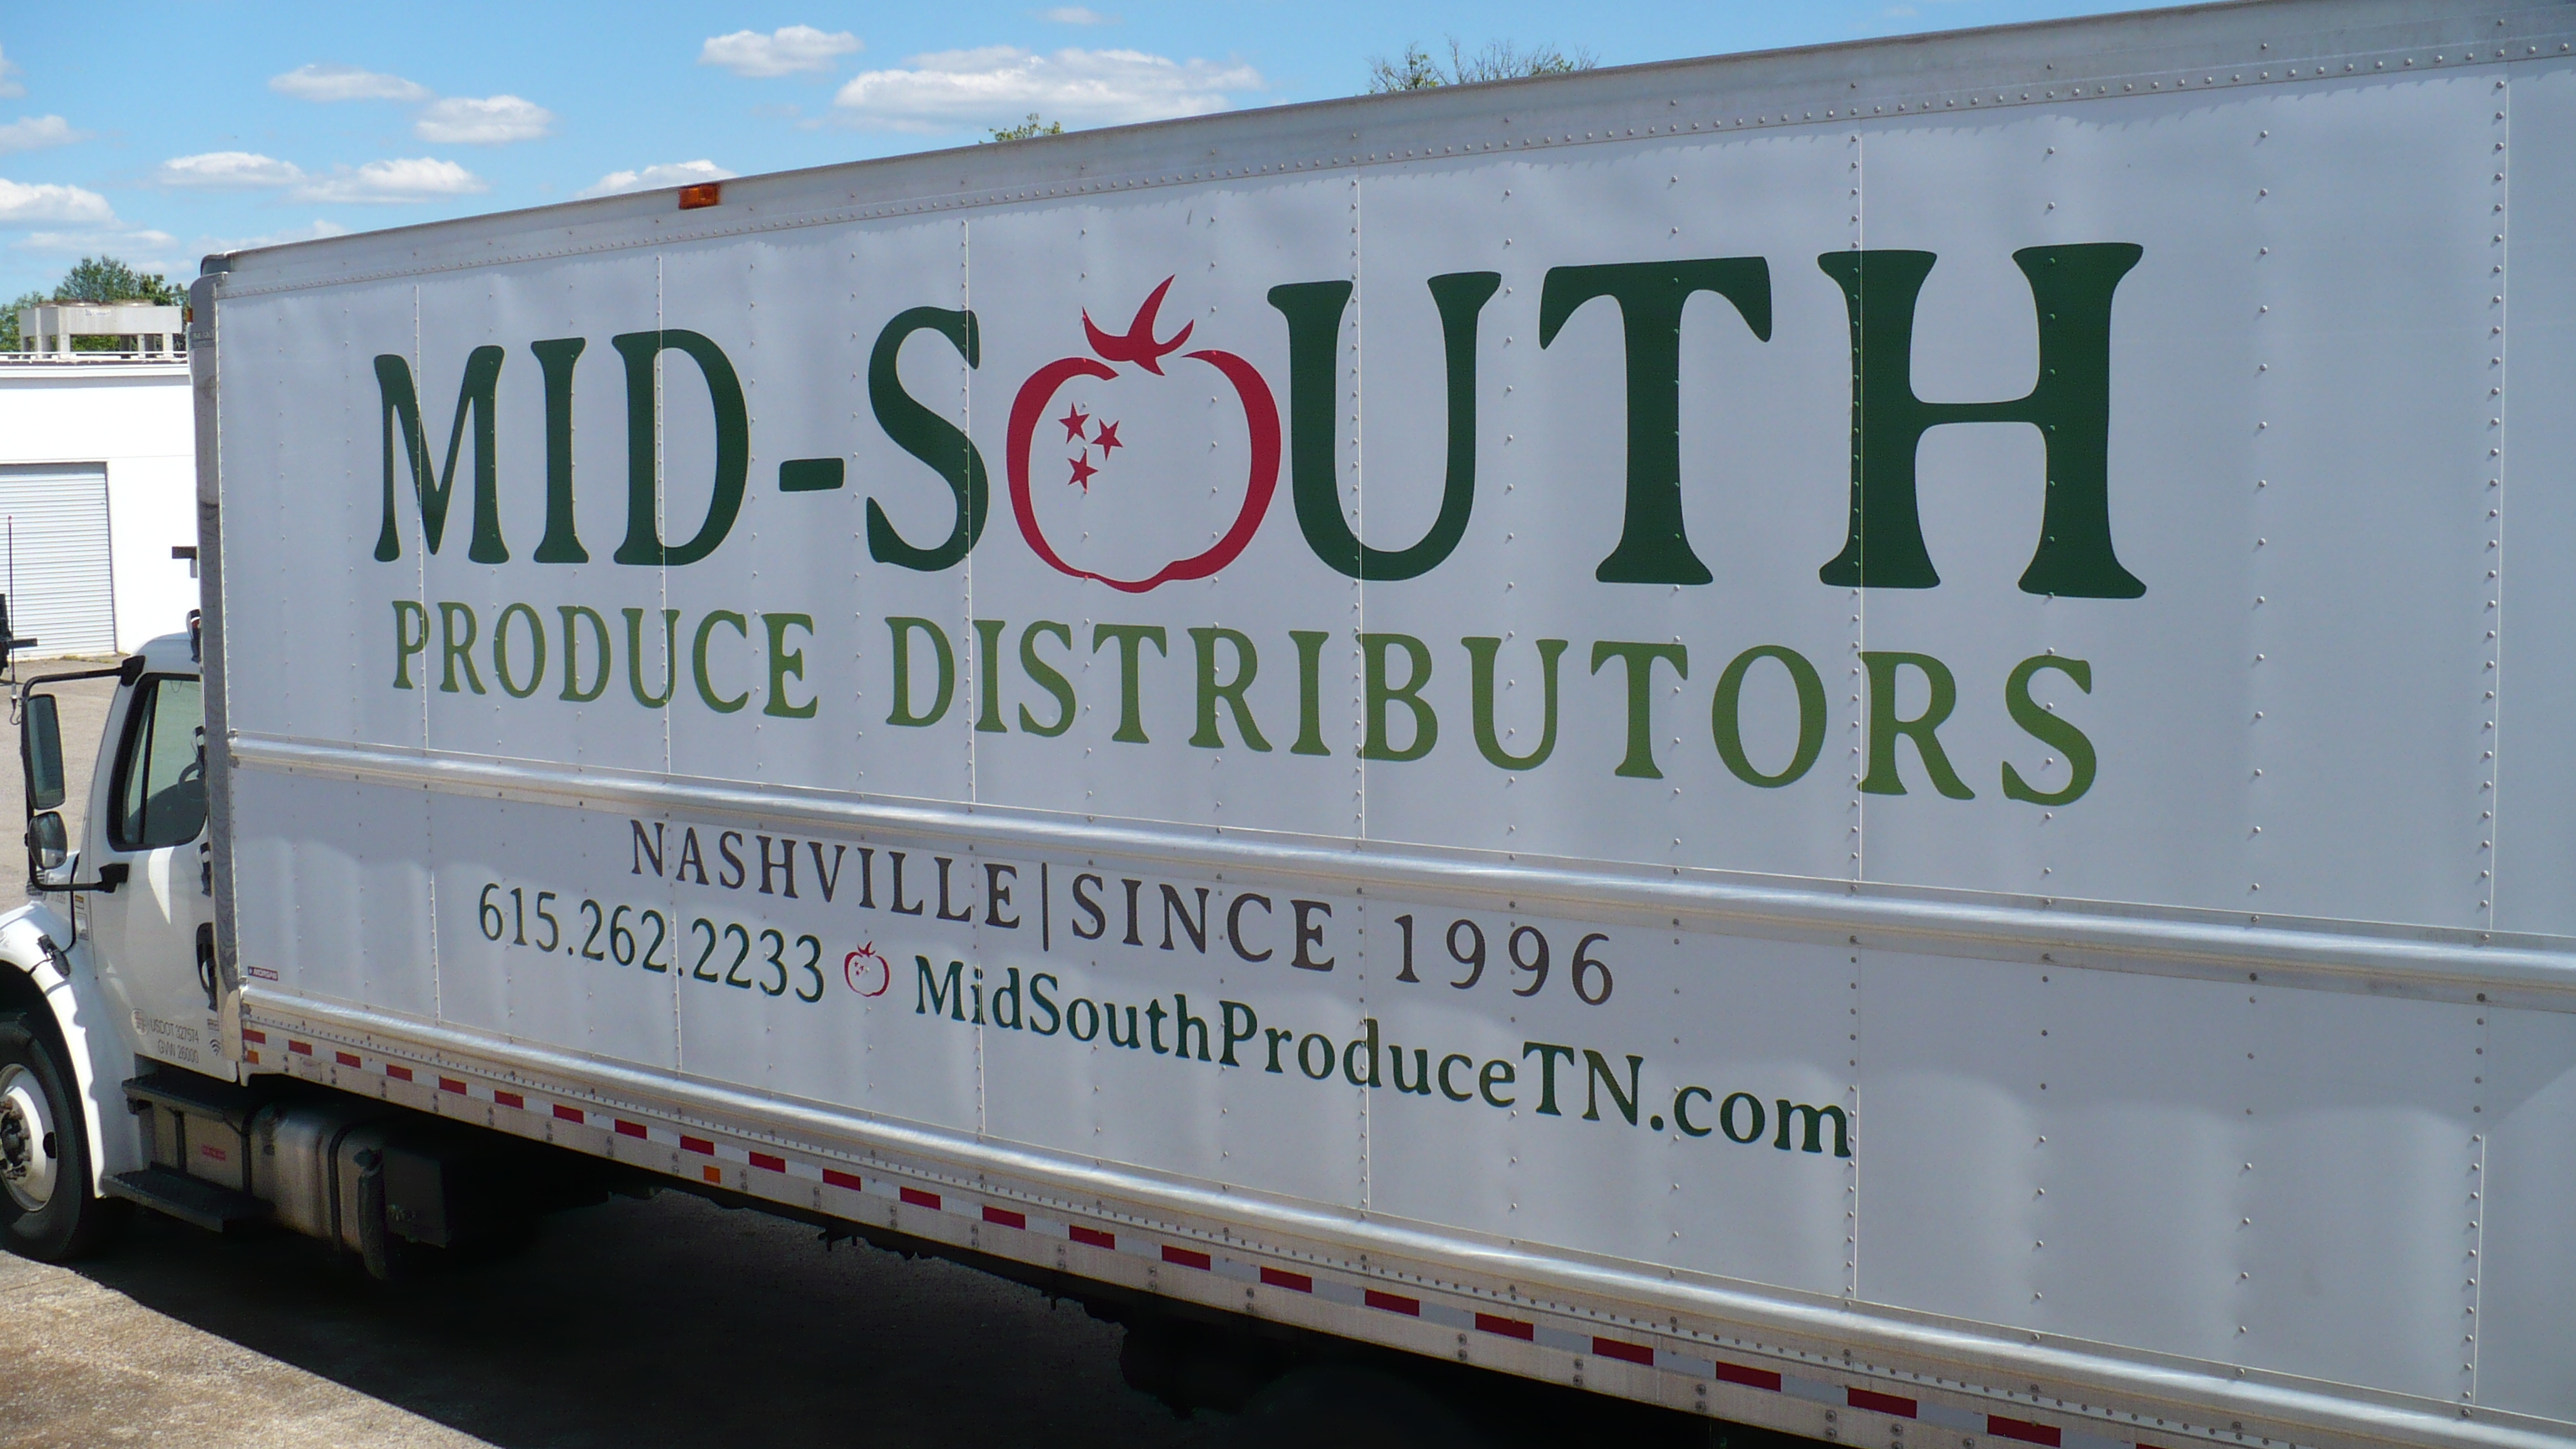 The funnest marketing company in Middle Tennessee